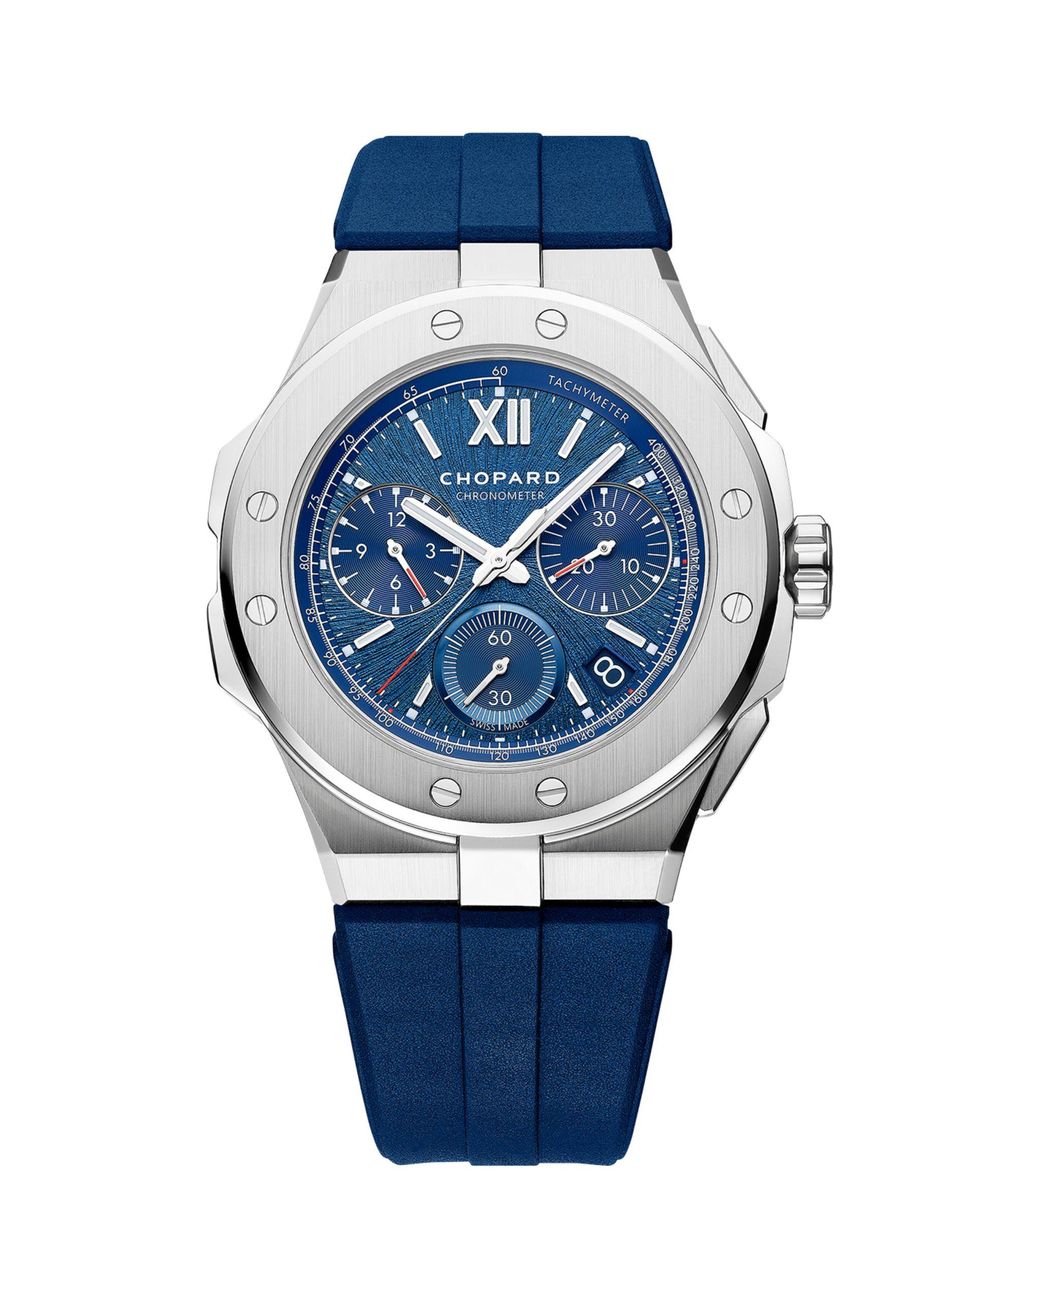 An Alpine Eagle from Chopard for the Middle East - News